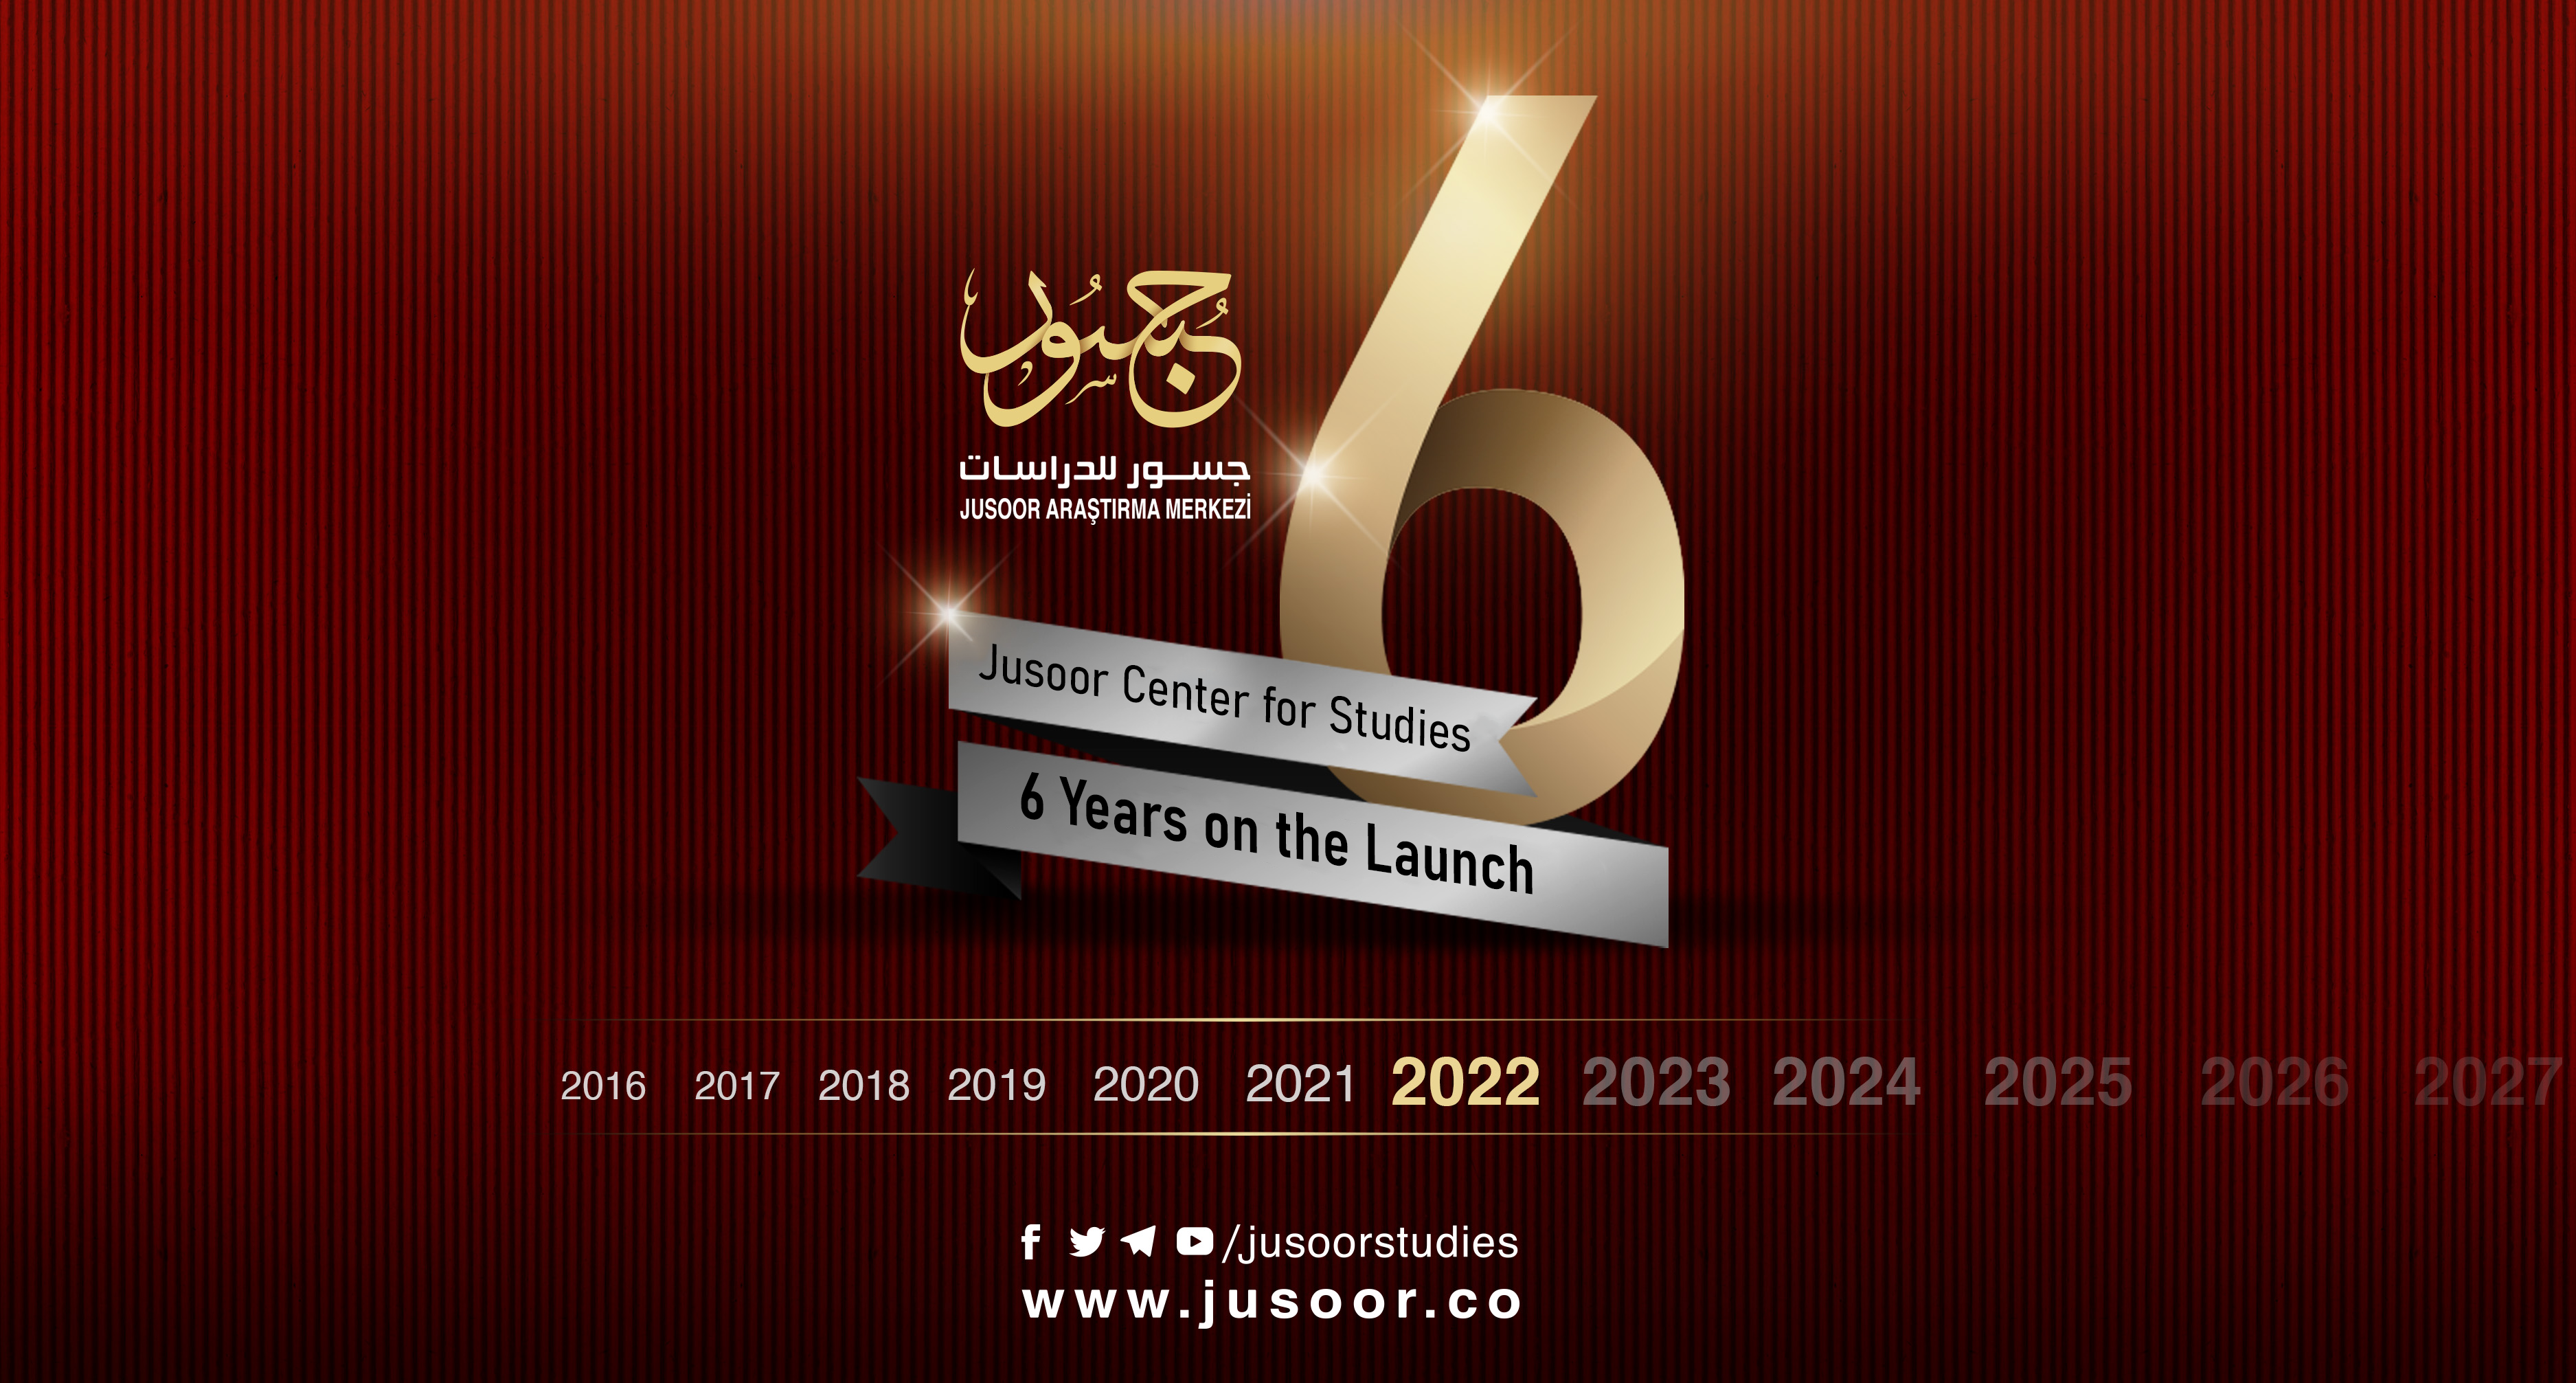 Jusoor Center for Studies: 6 Years on the Launch